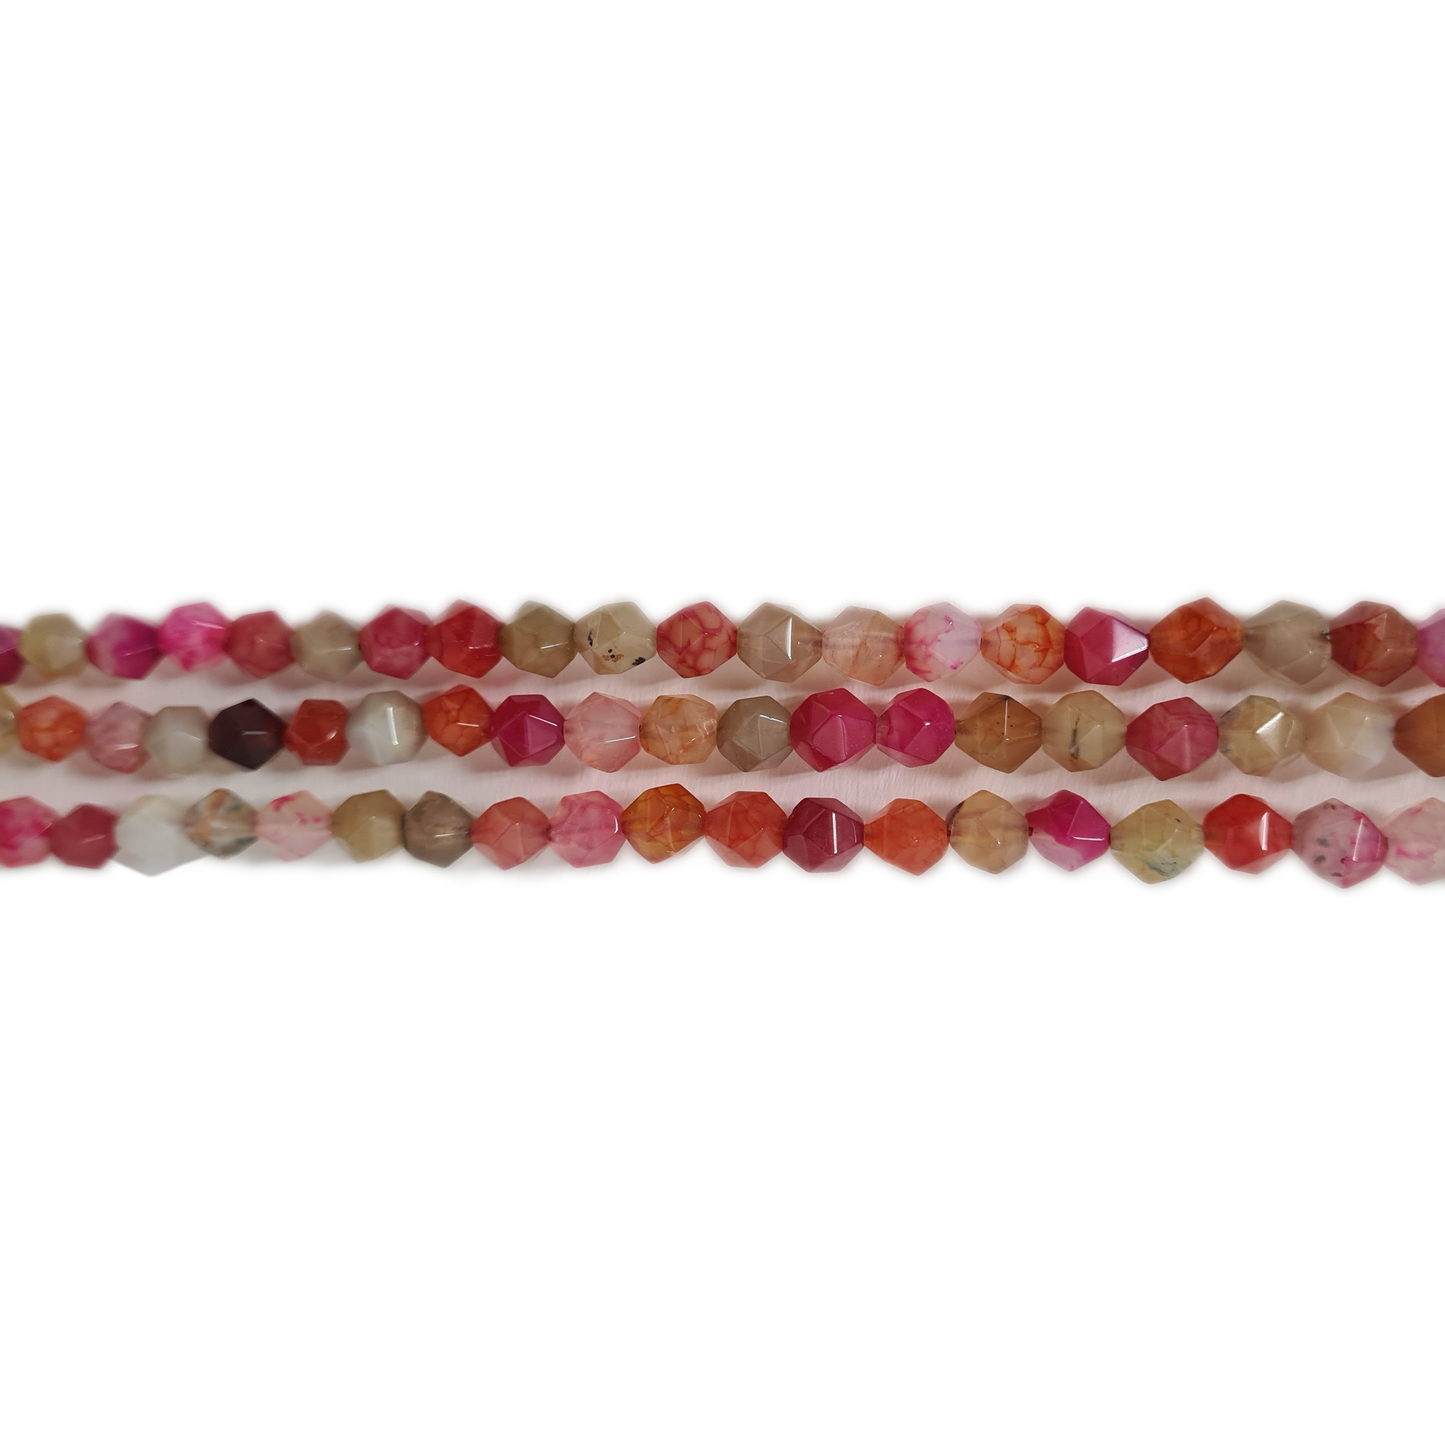 Strand of 8mm Agate Beads